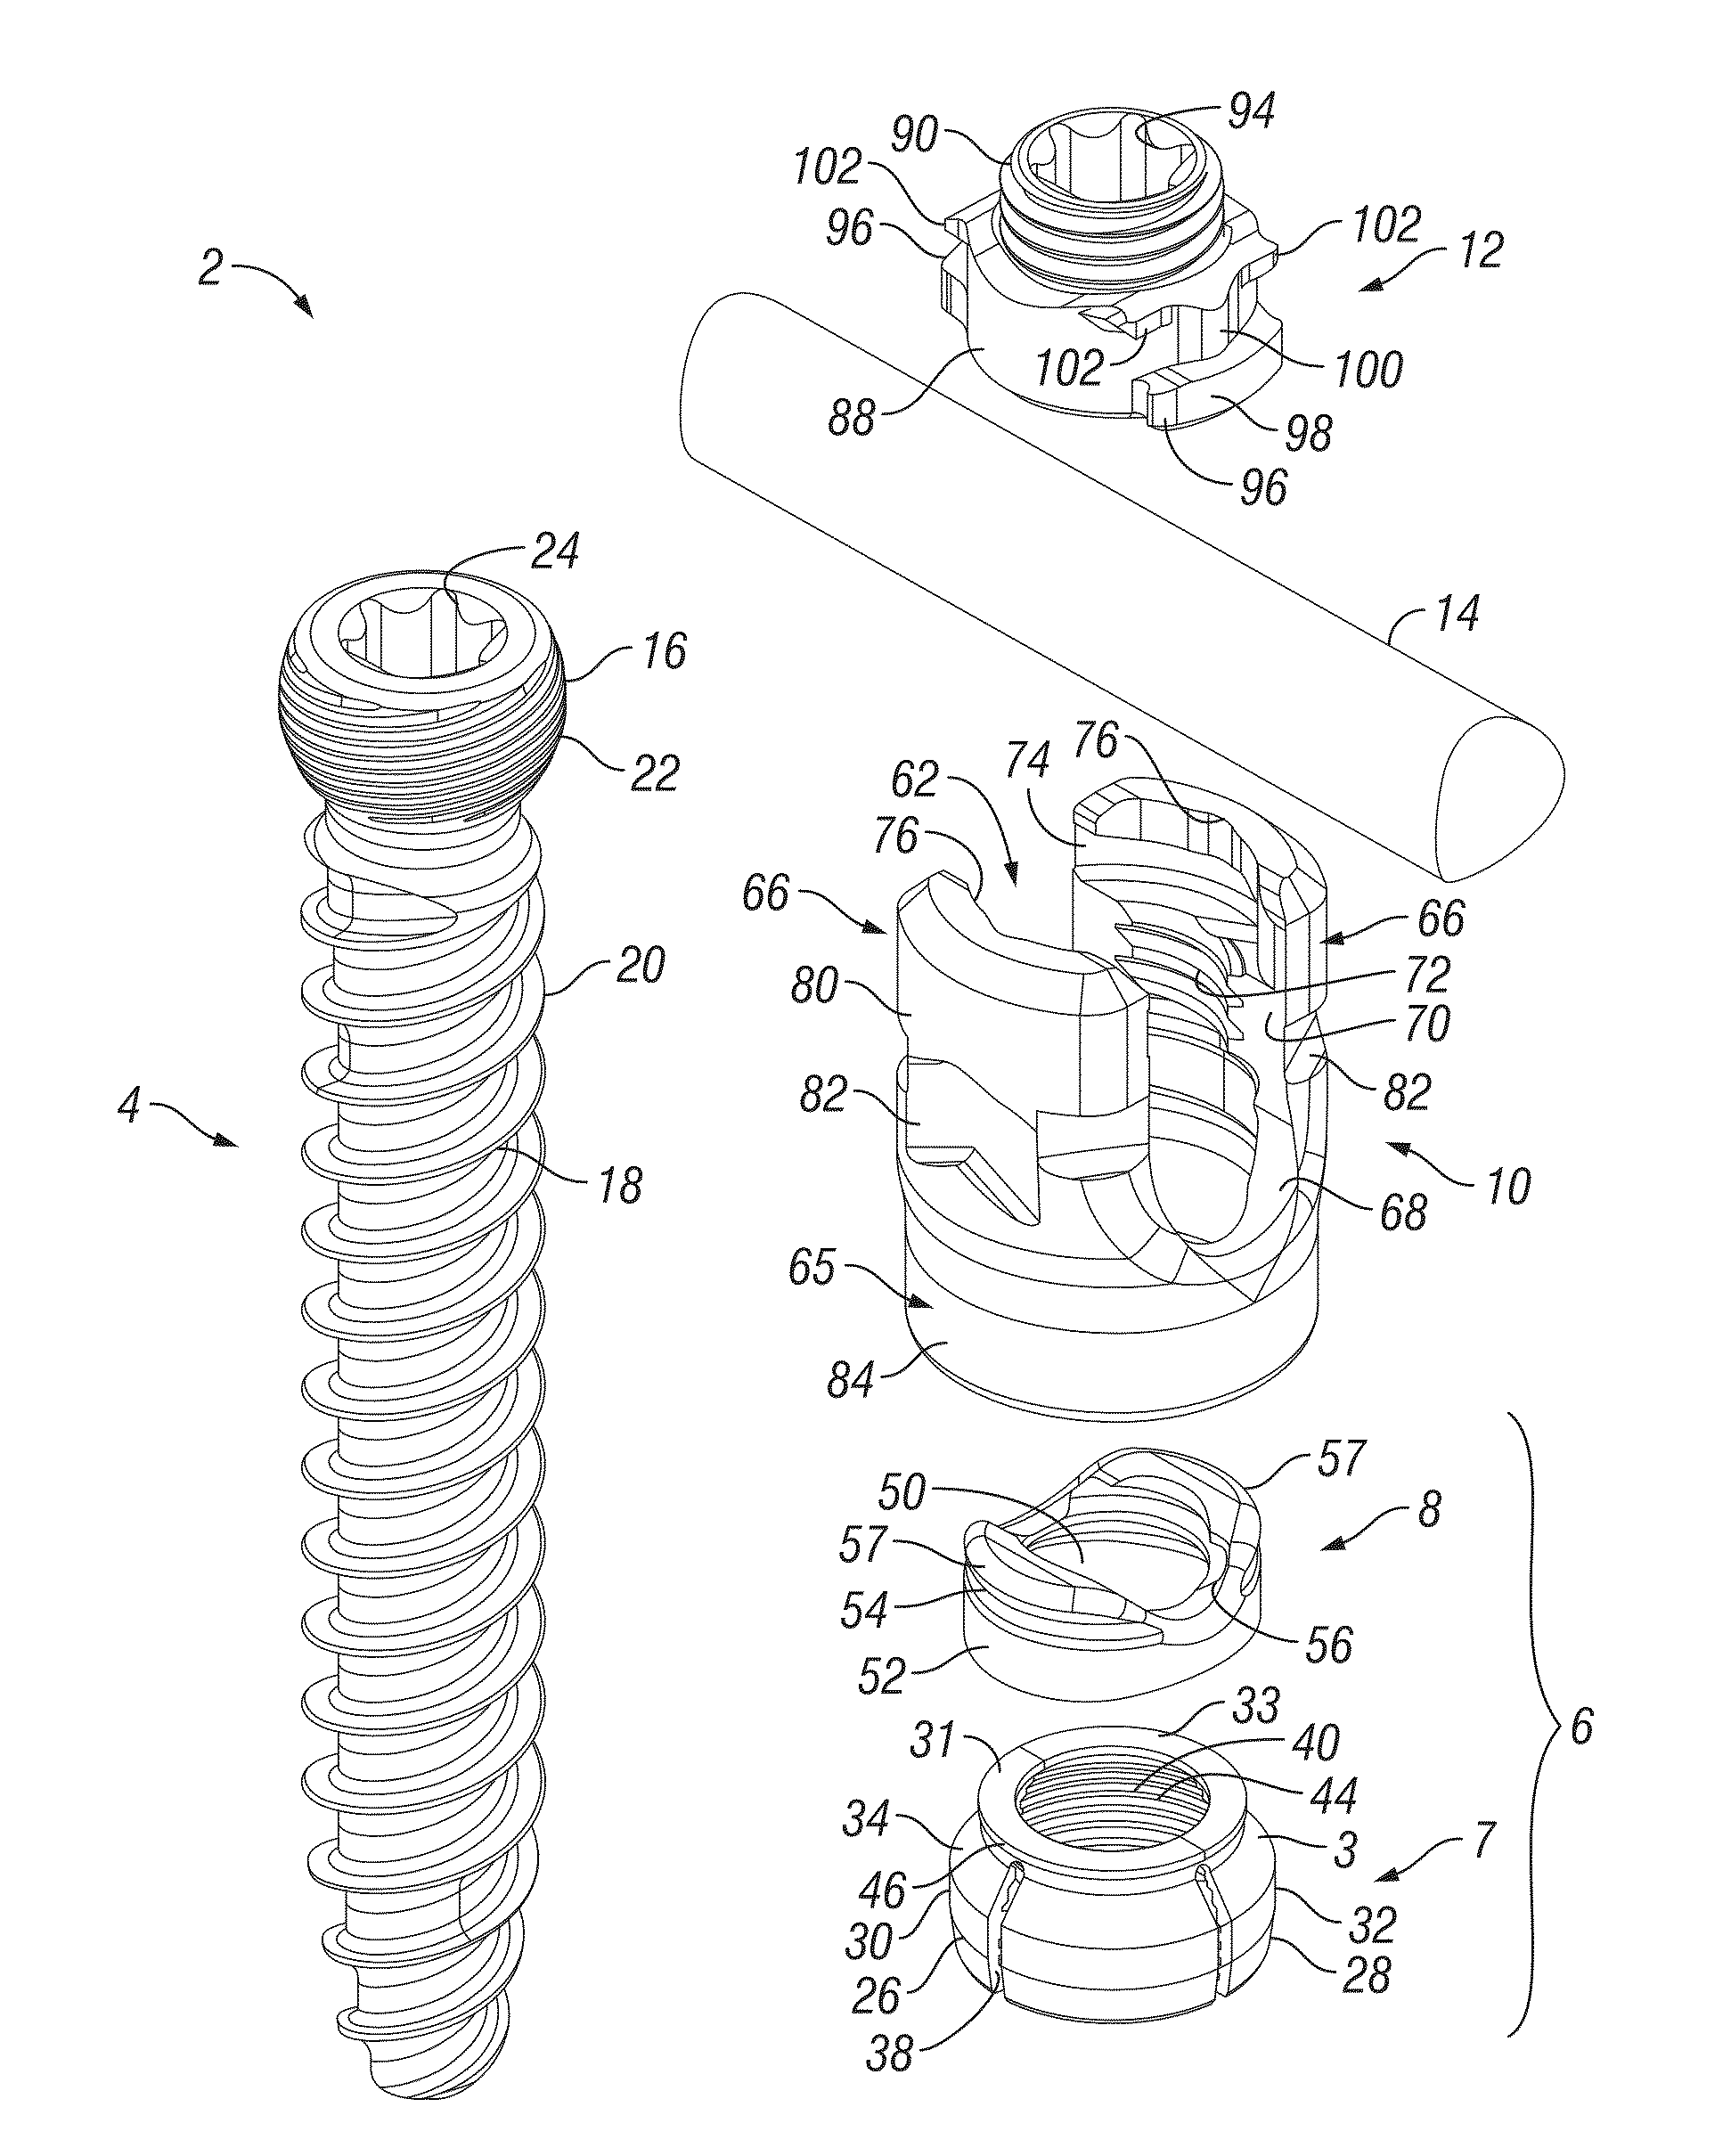 Orthopedic fixation devices and methods of installation thereof